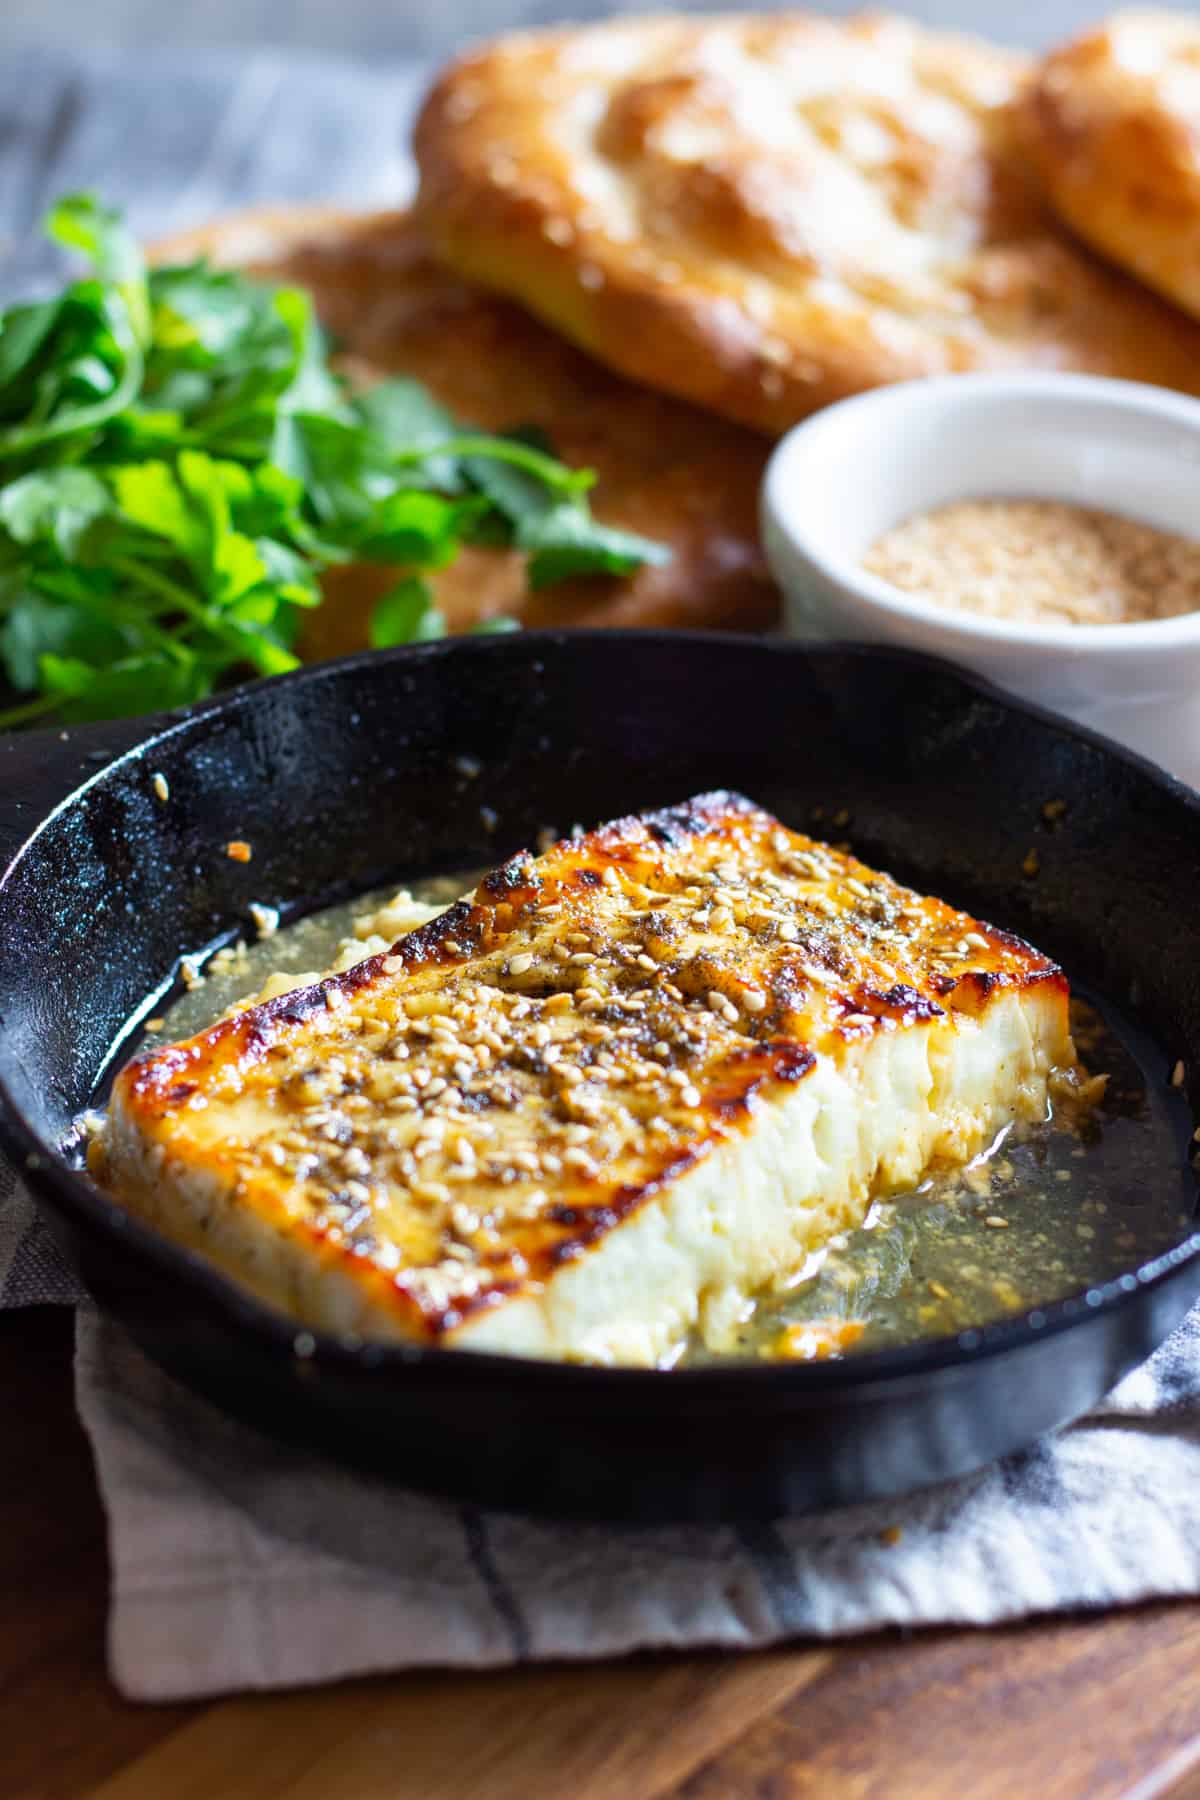 This baked feta recipe is easy and makes a delicious appetizer. It's made with only five ingredients and is topped with honey and zaatar. 
